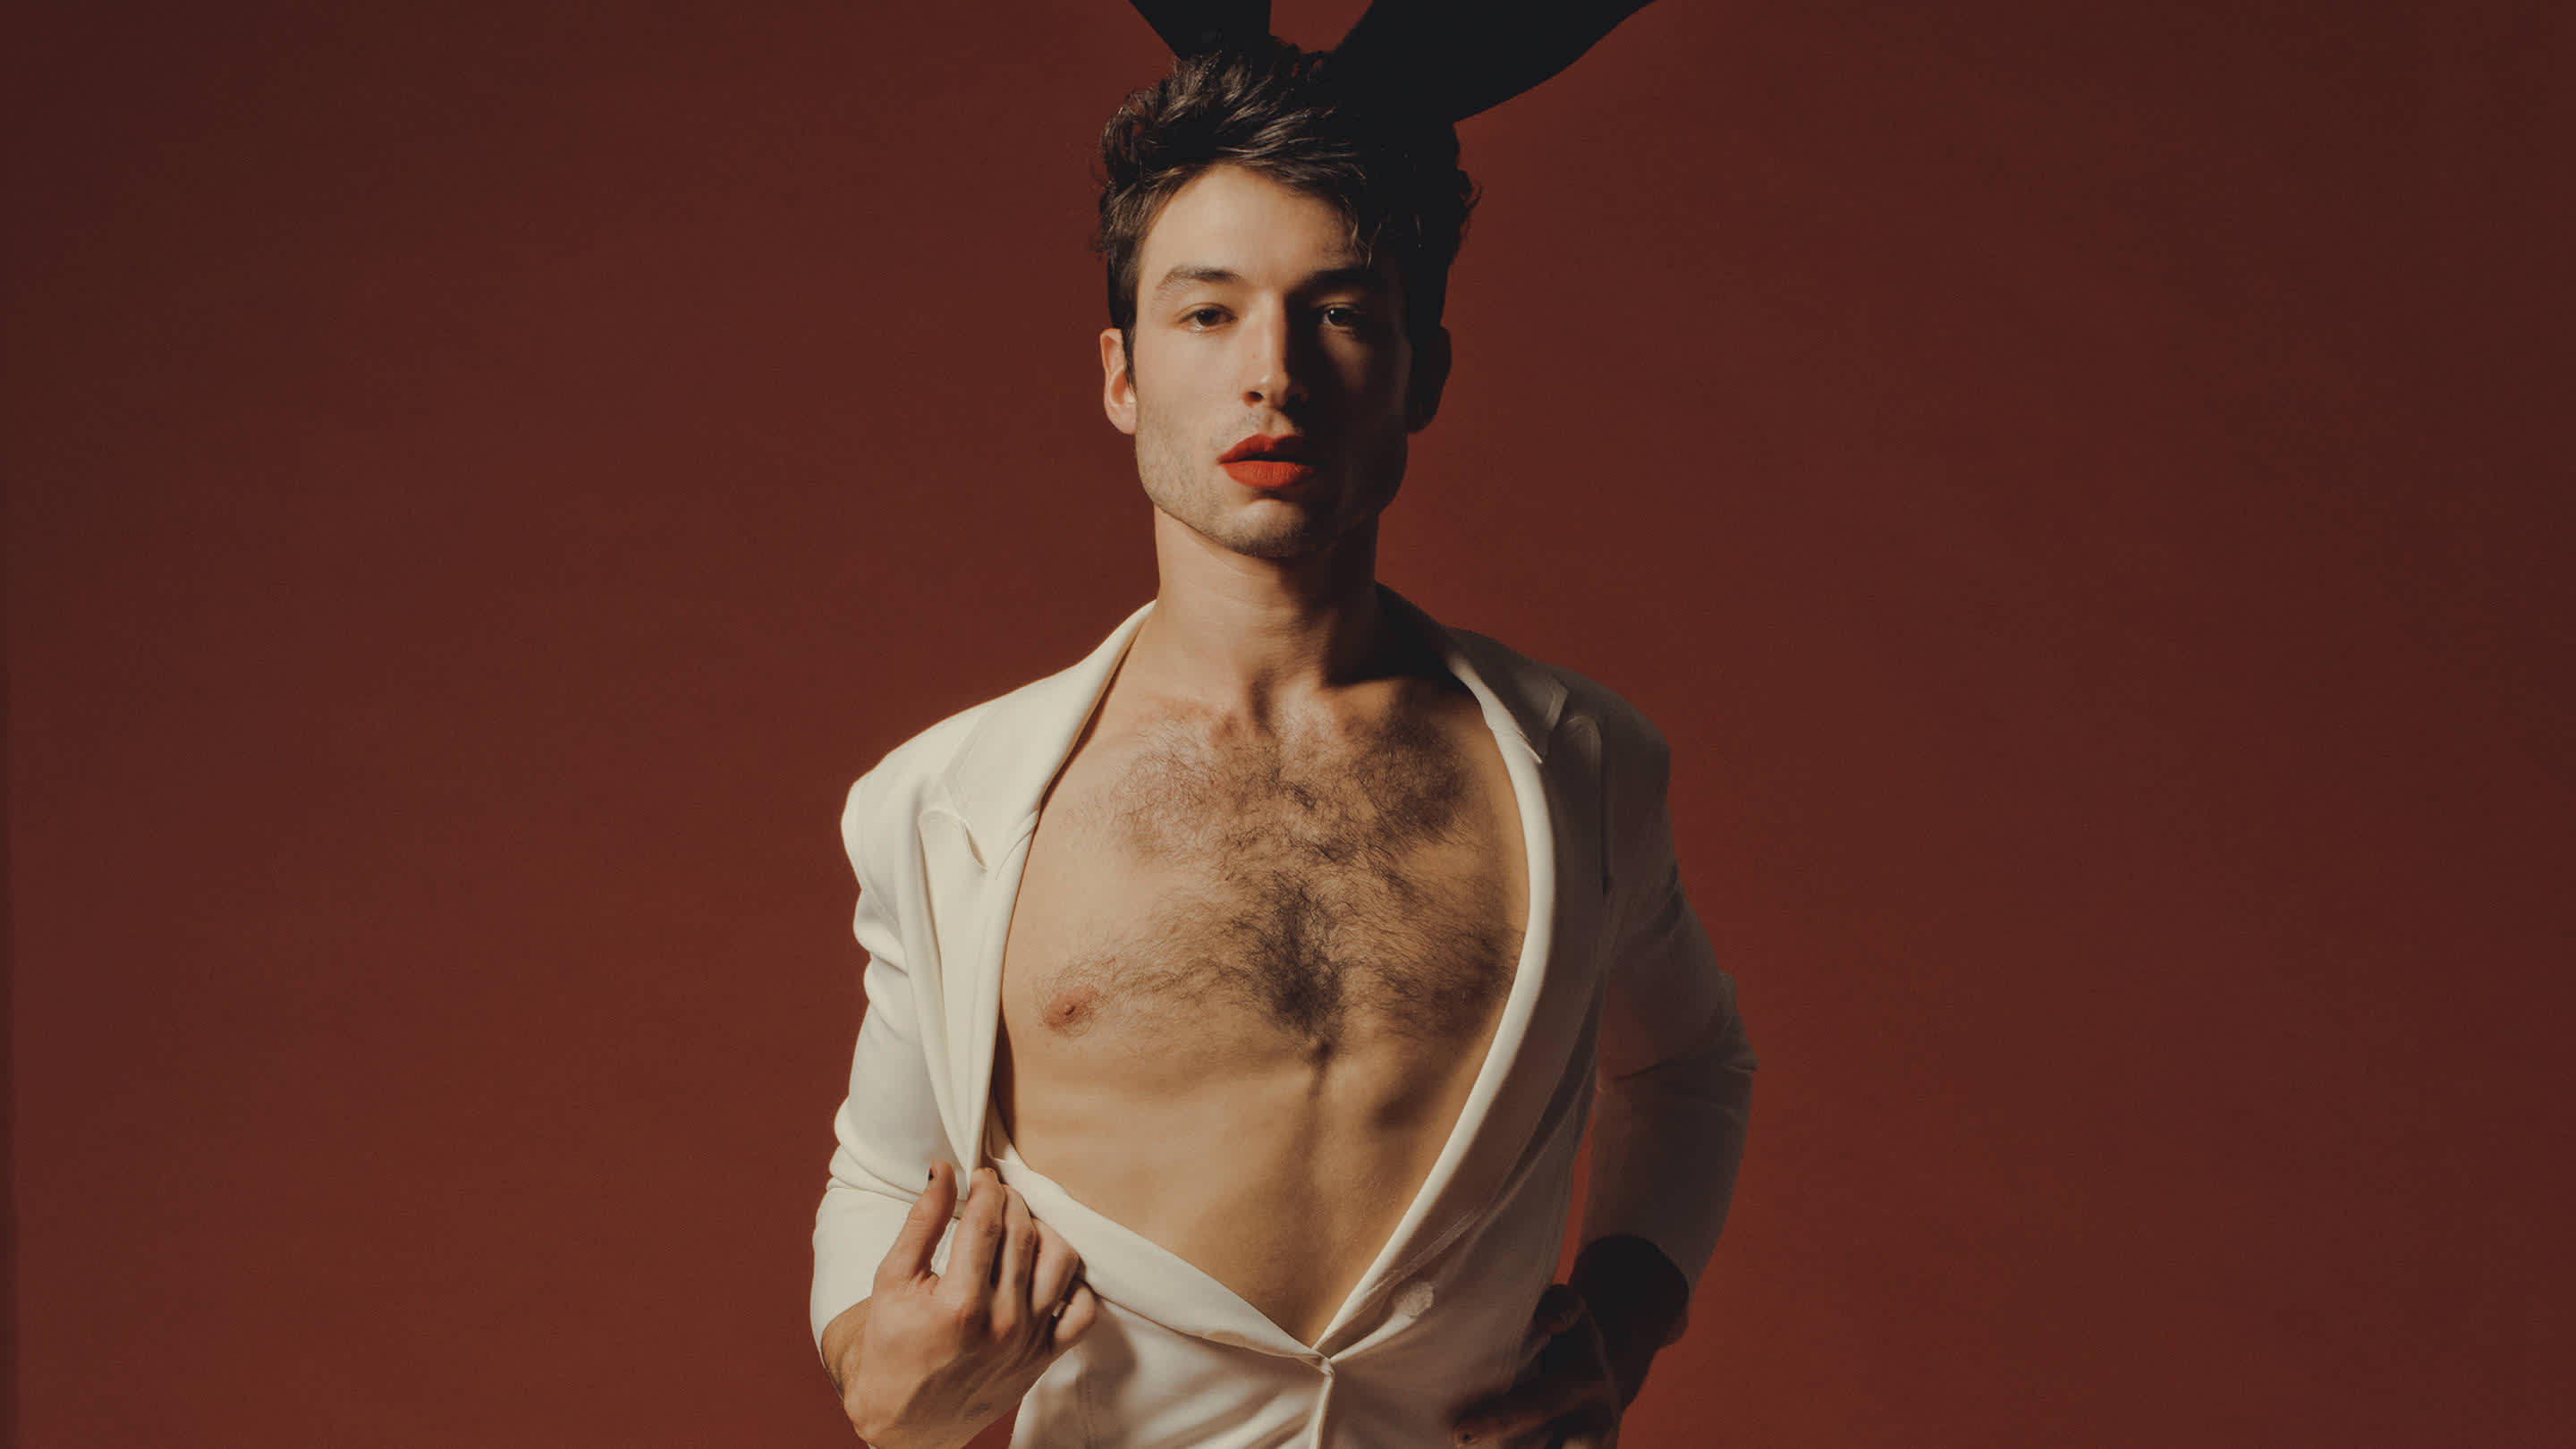 Group Games Sex Playboy - Ezra Miller Poses for Playboy, Talks Suicide and Polyamory